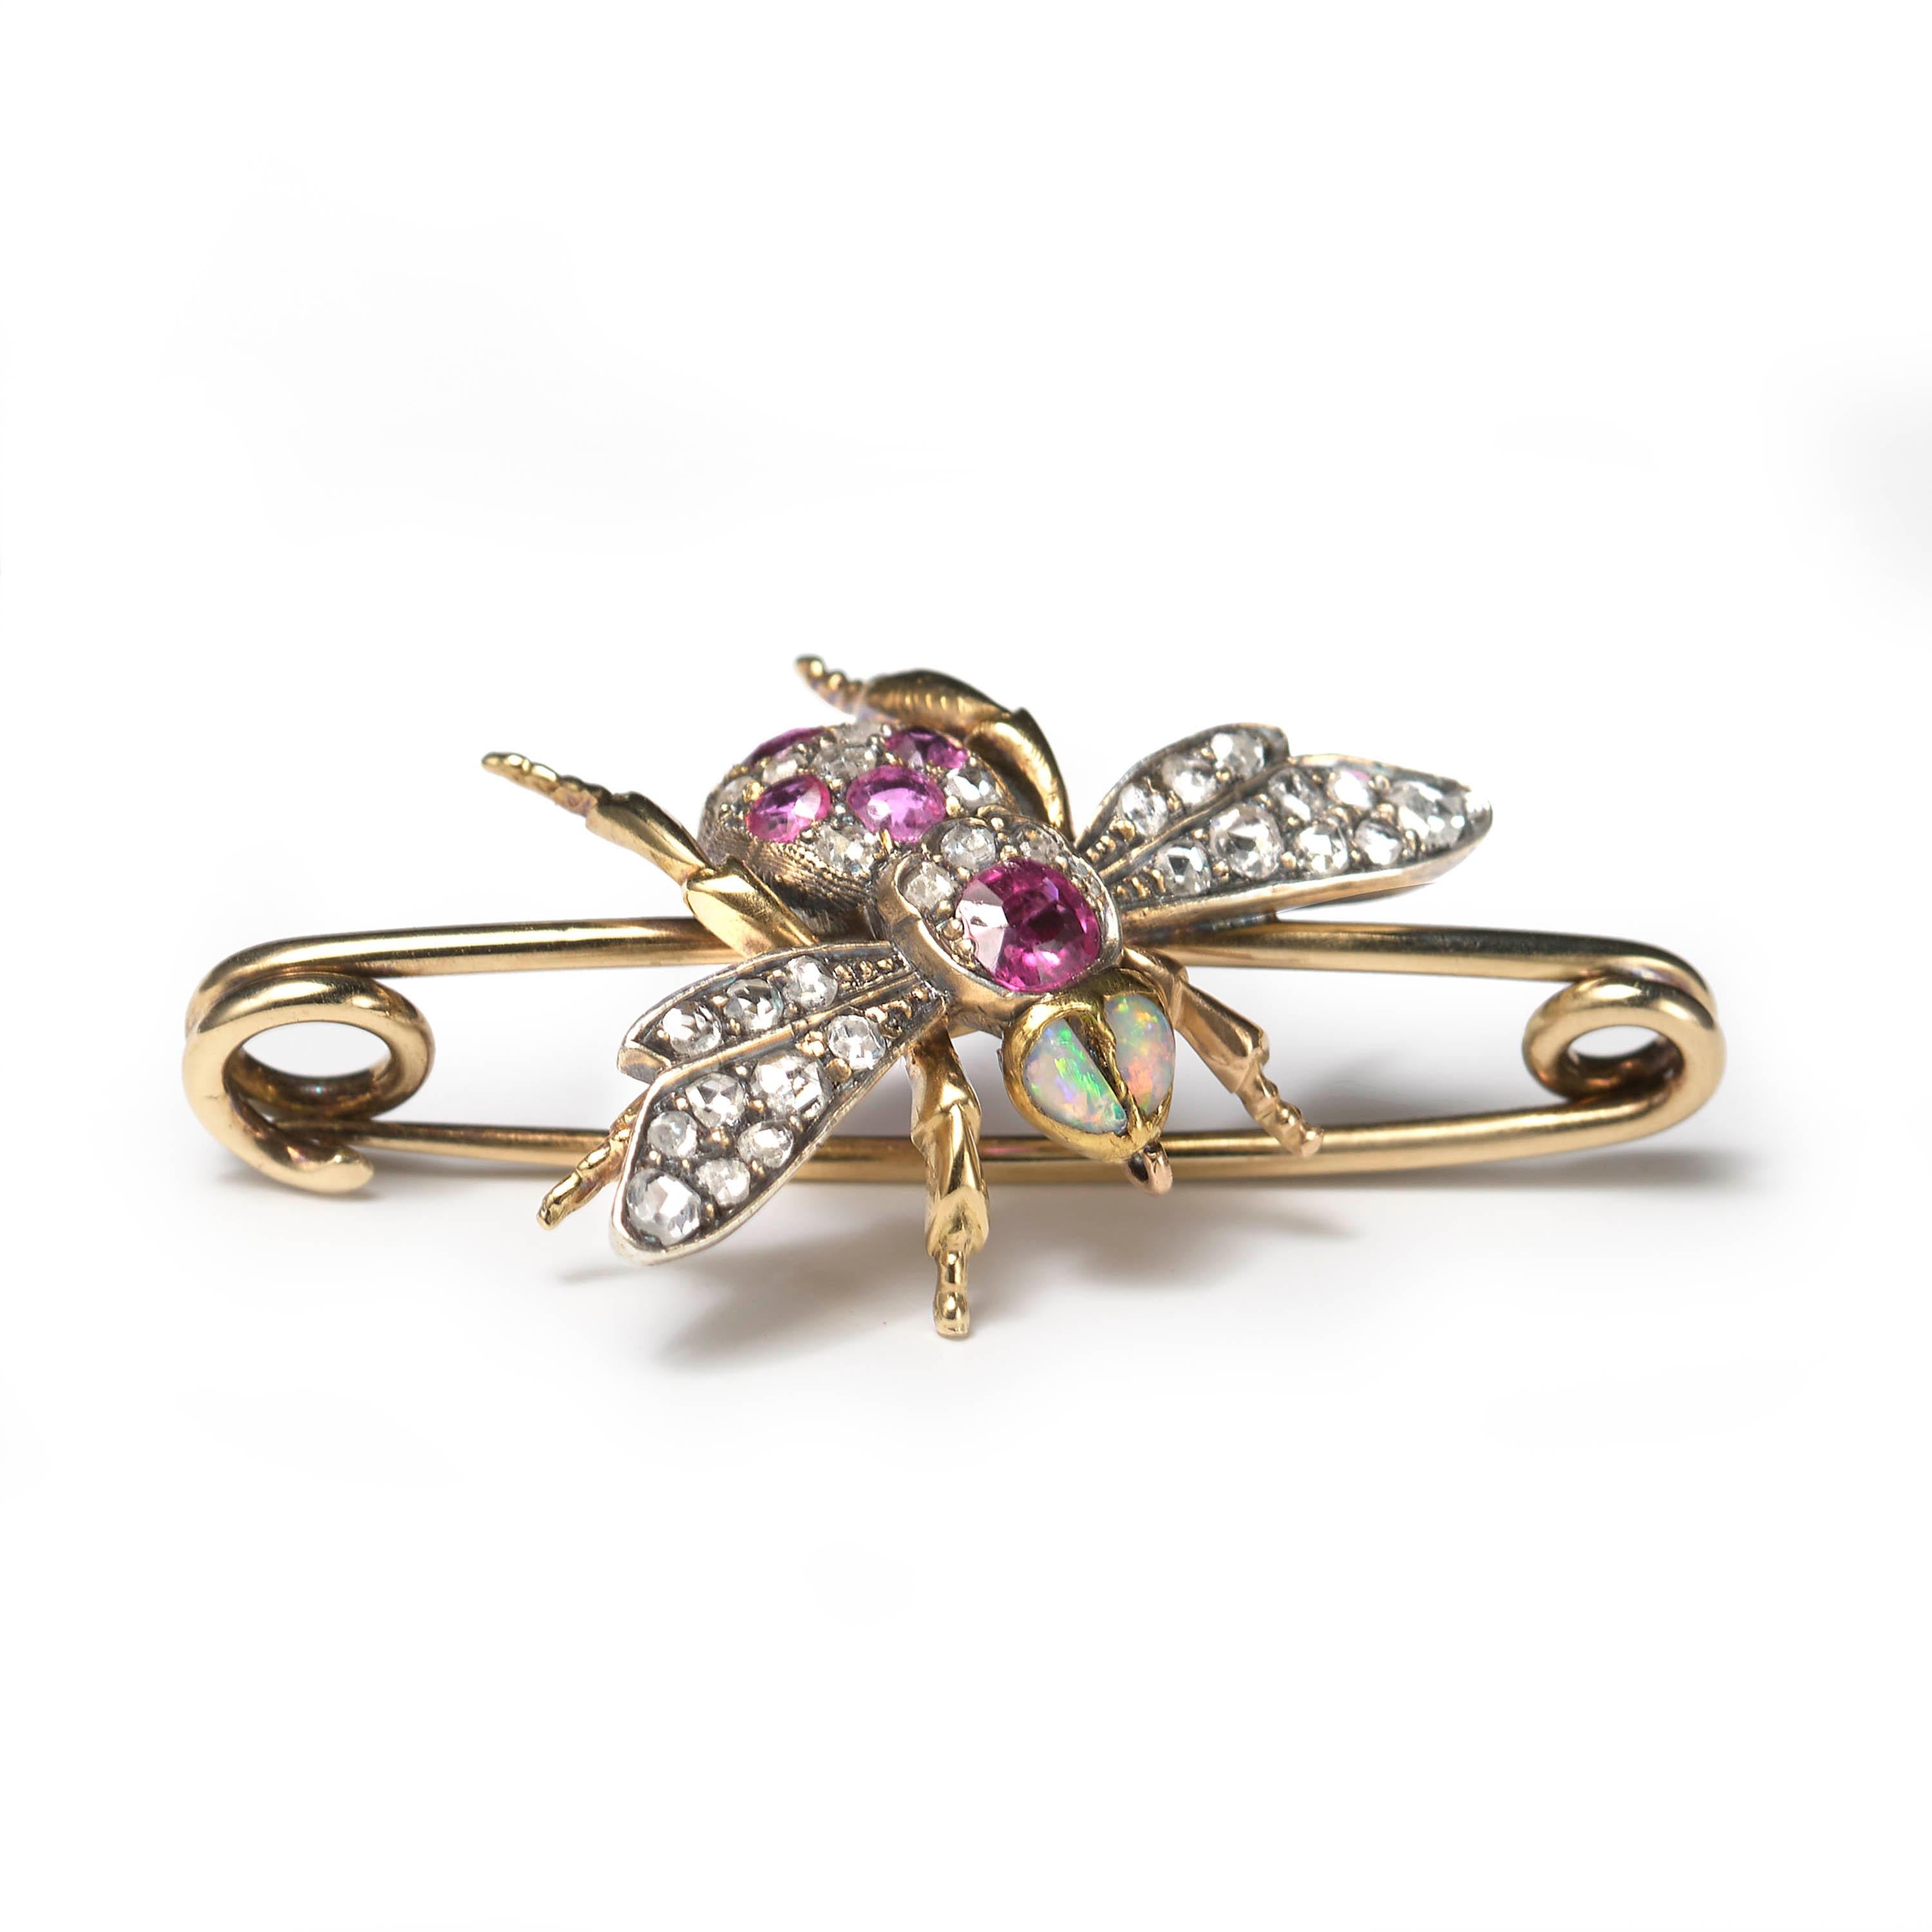 A Victorian bee brooch, set with two opals for the eyes, round and cushion-shaped rubies and rose-cut diamonds to the body, and rose-cut diamonds in the wings, mounted in gold, with silver settings for the wings and set upon a gold bar pin. Circa